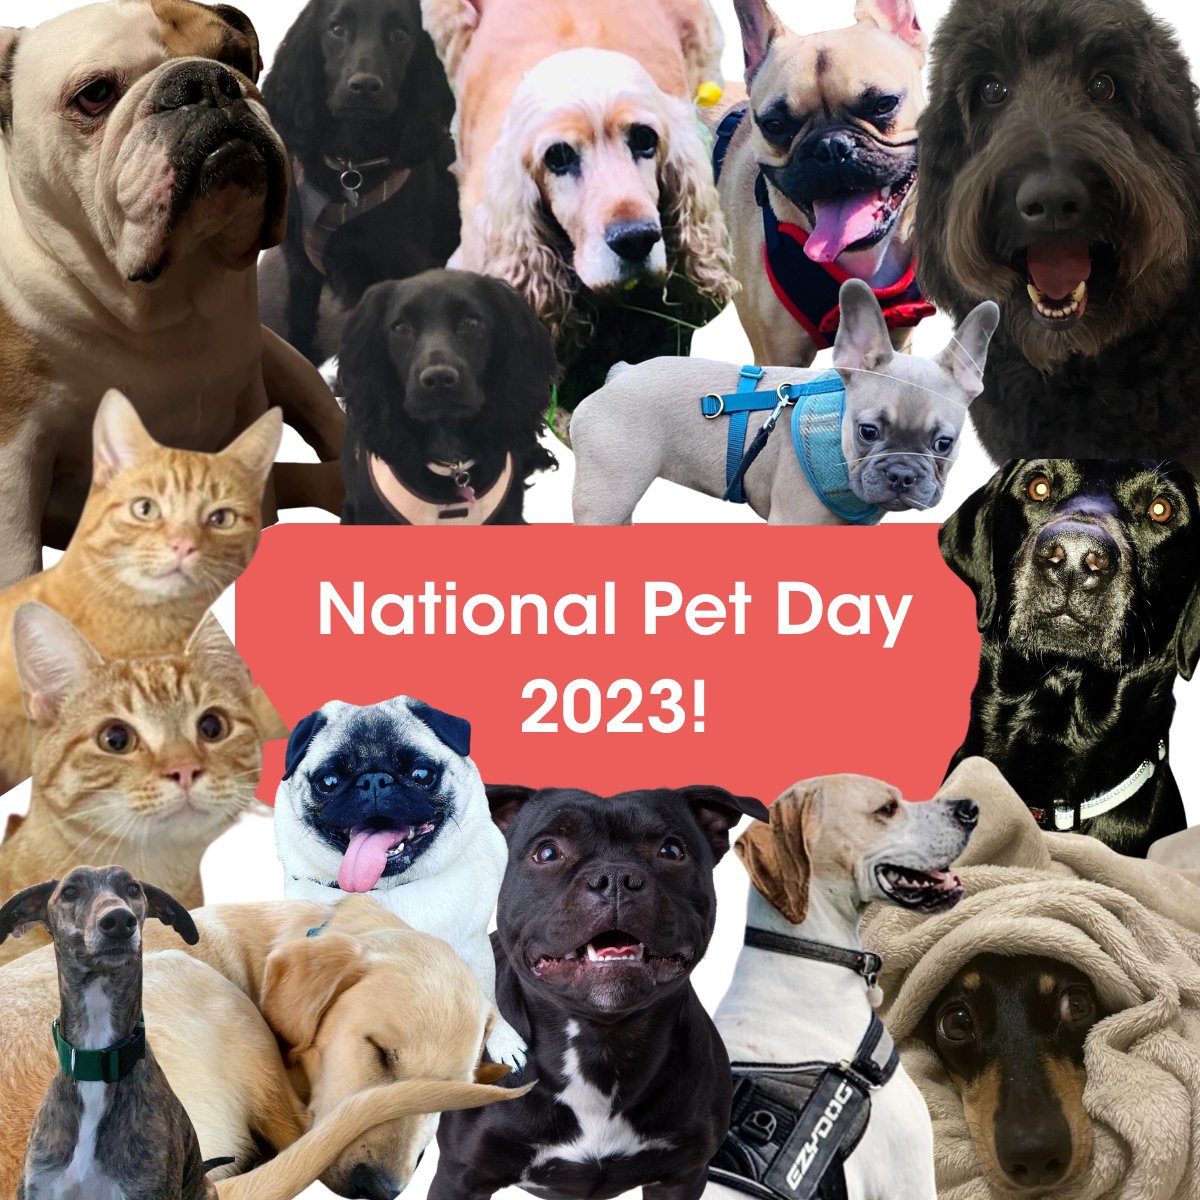 Its National Pet Day 2023! 🐾 What better excuse to post our teams beloved animals 🐶❤️🐱 How many furry friends of #teamdbfb can you spot in this? 👀 #NationalPetDay2023 | #Petlovers |